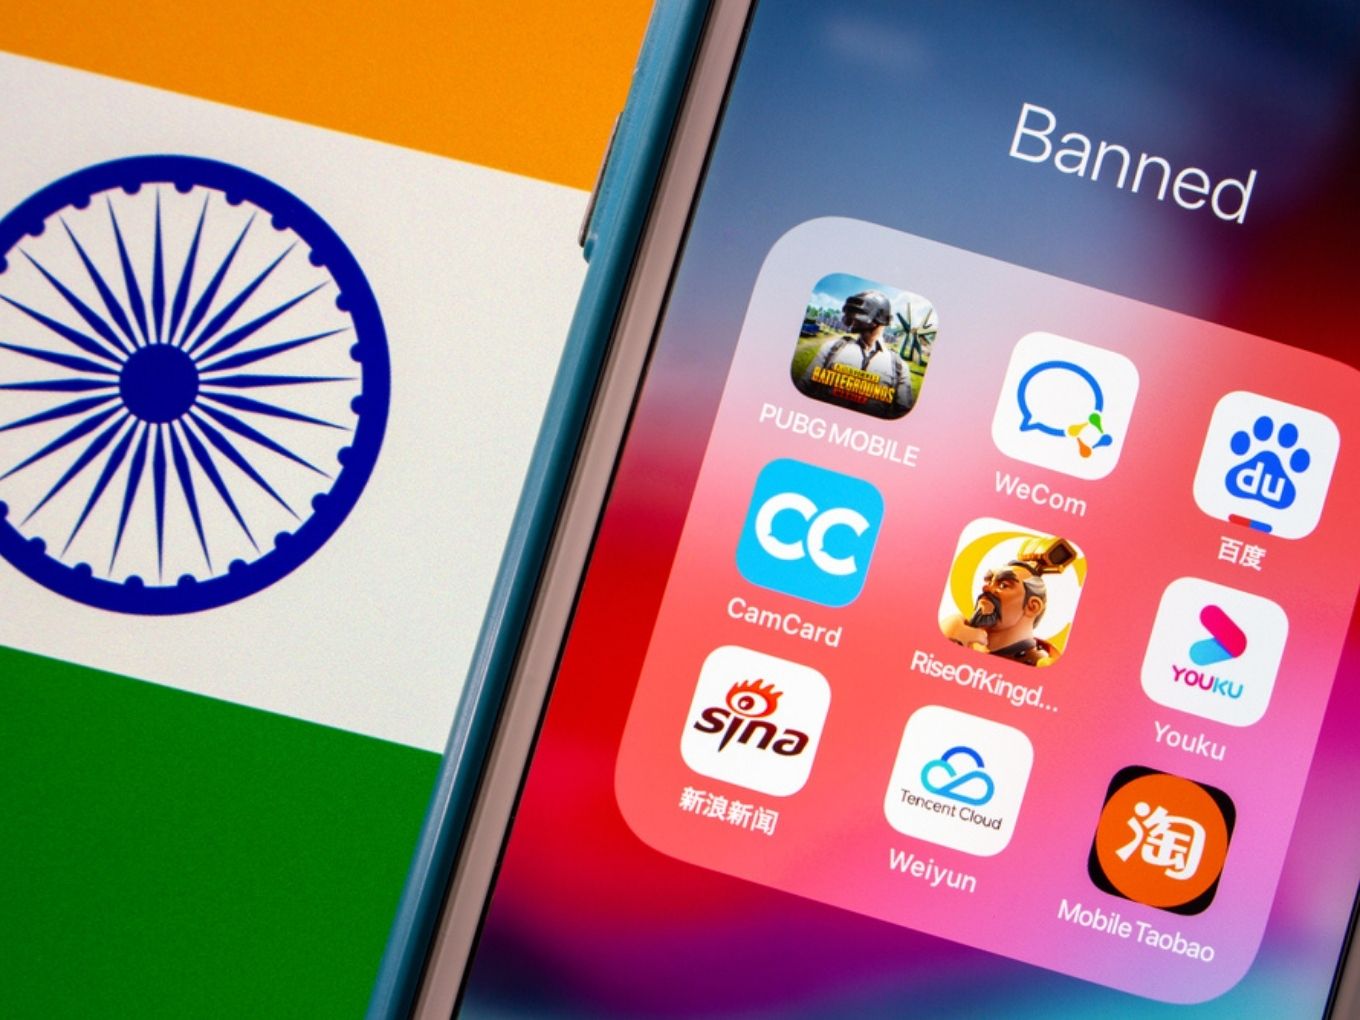 TikTok, PUBG To Stay Out Of India; Govt Firm On Chinese App Ban